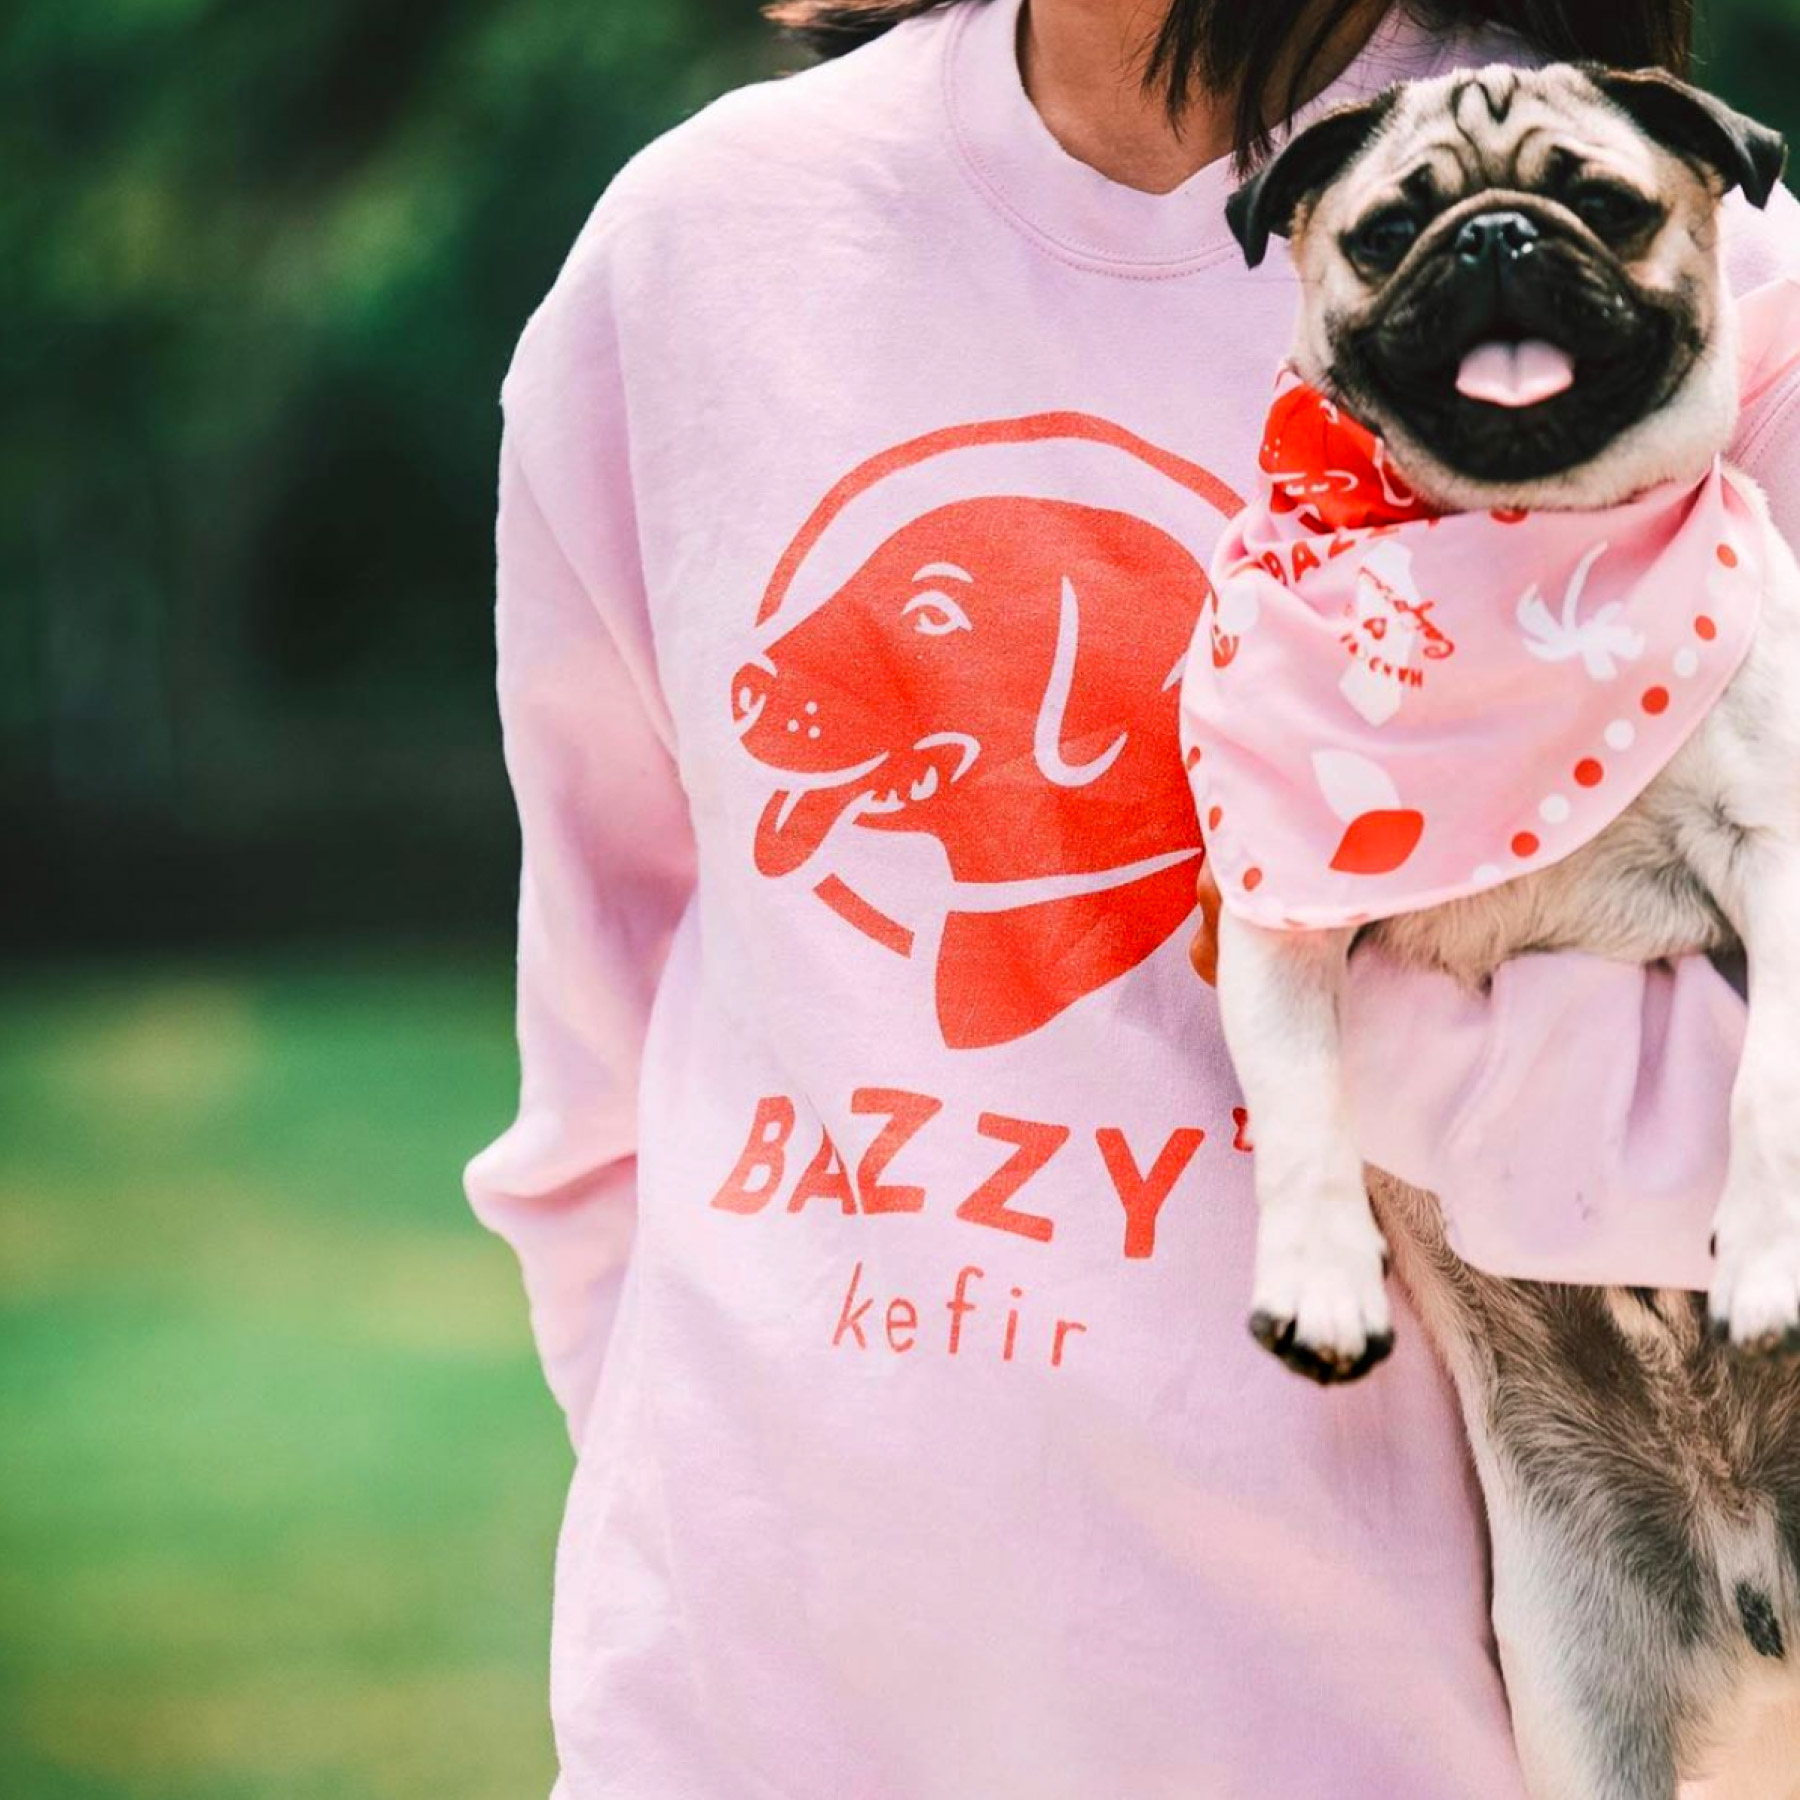 matching dog and owner apparel Bazzy's Kefir